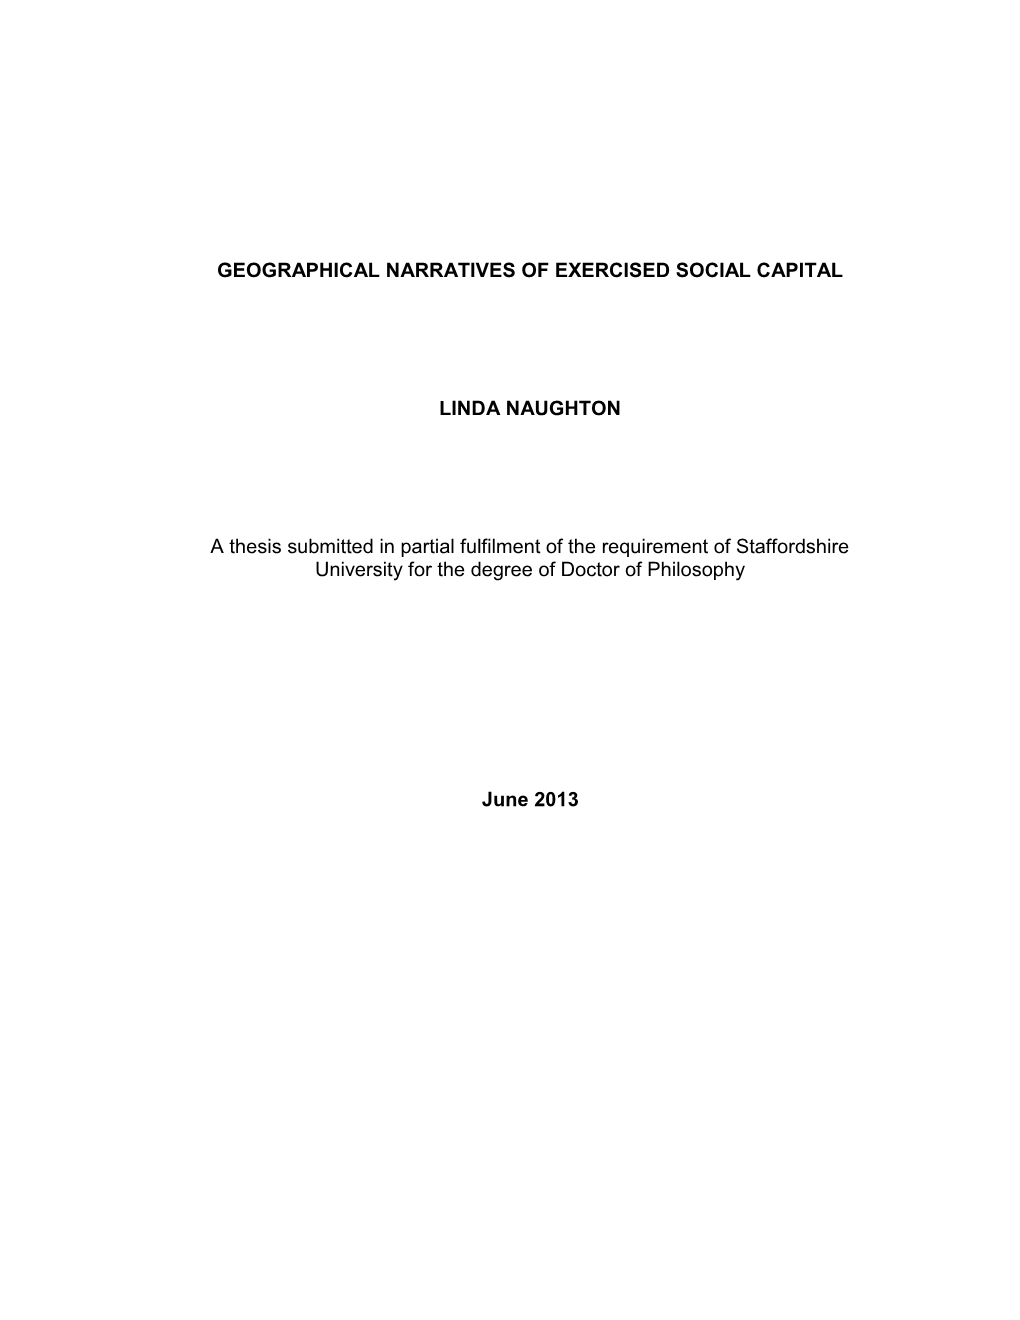 Geographical Narratives of Exercised Social Capital